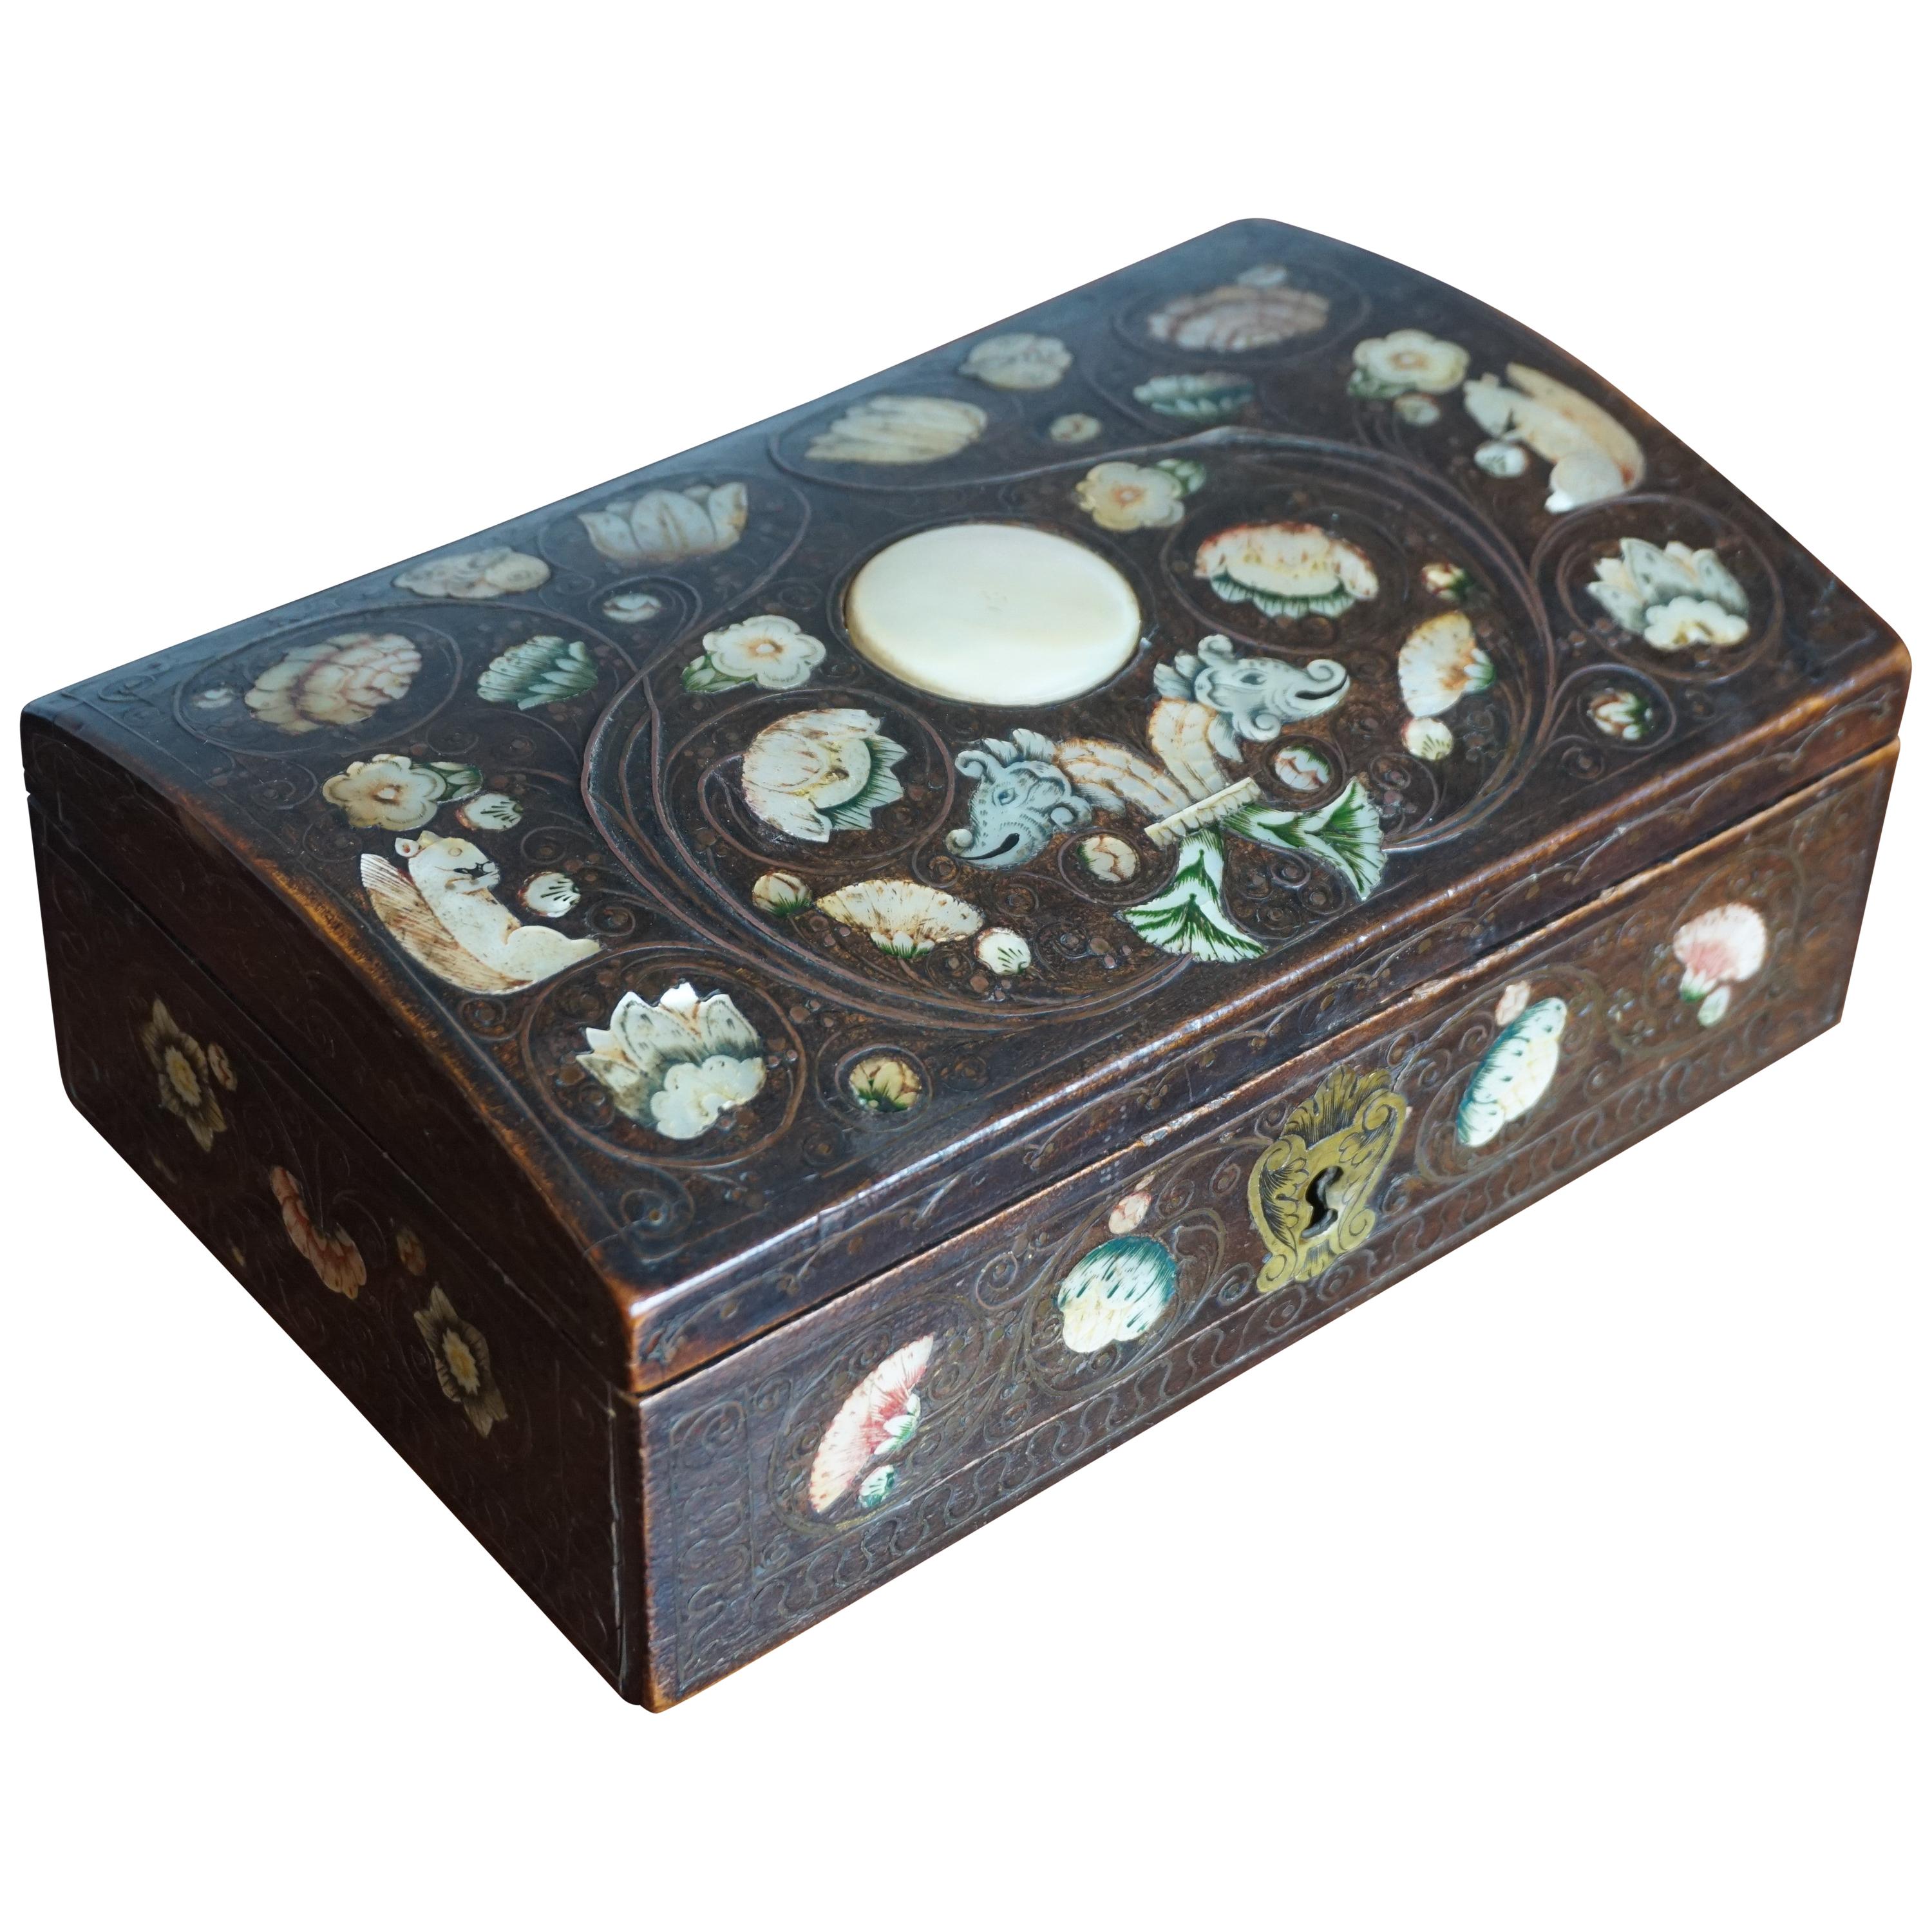 Very Rare, 17th Century Spa Mother of Pearl Writing Box with Inlaid Brass Wire